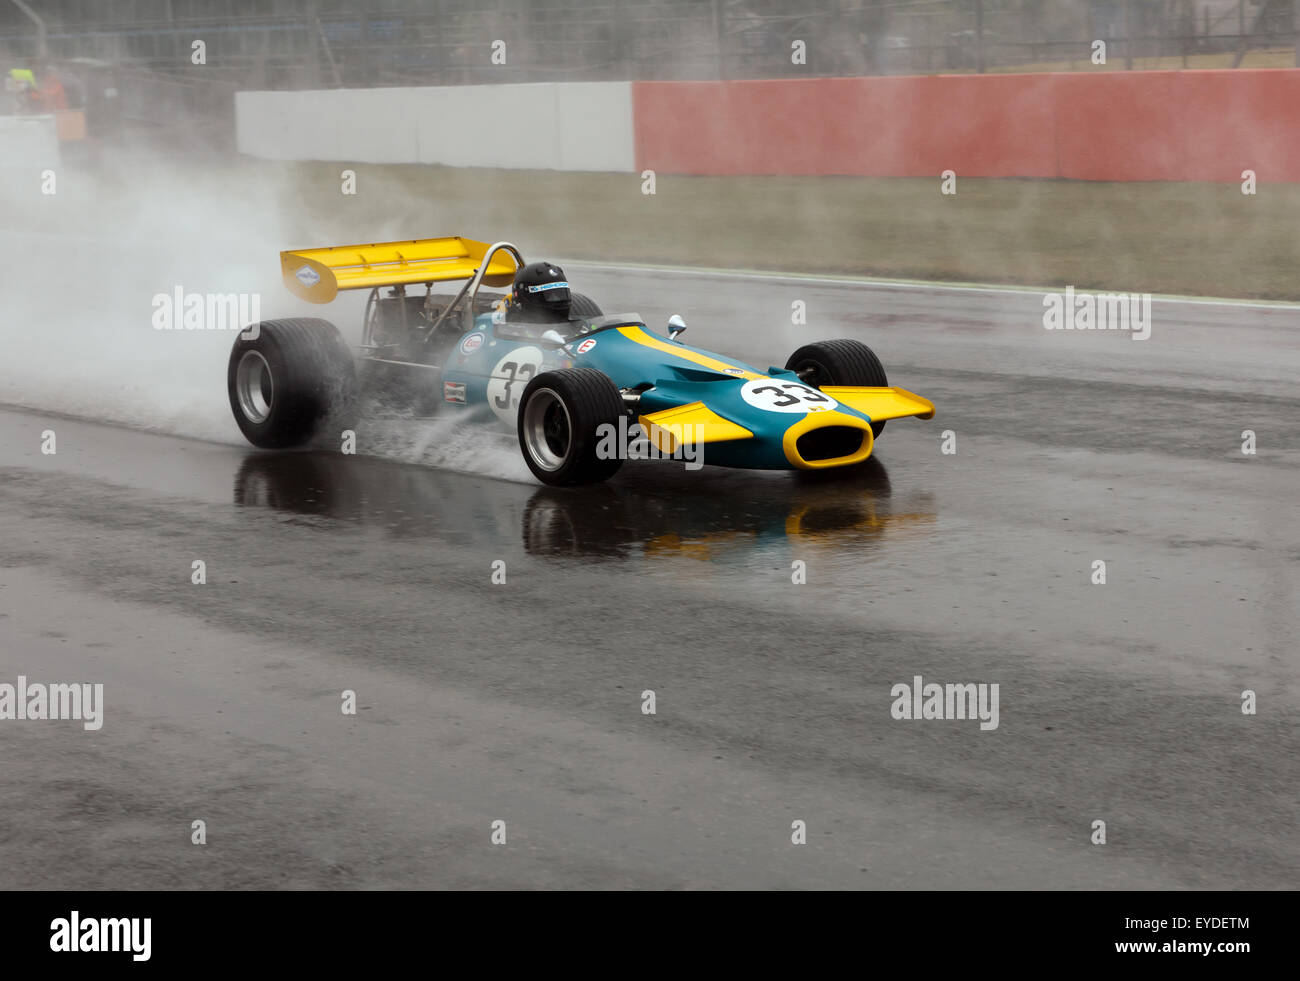 Duncan Dayton drives a 1971, Brabham BT33, in heavy rain, during a qualifying session for the FIA Master's Historic Formula One Race Stock Photo